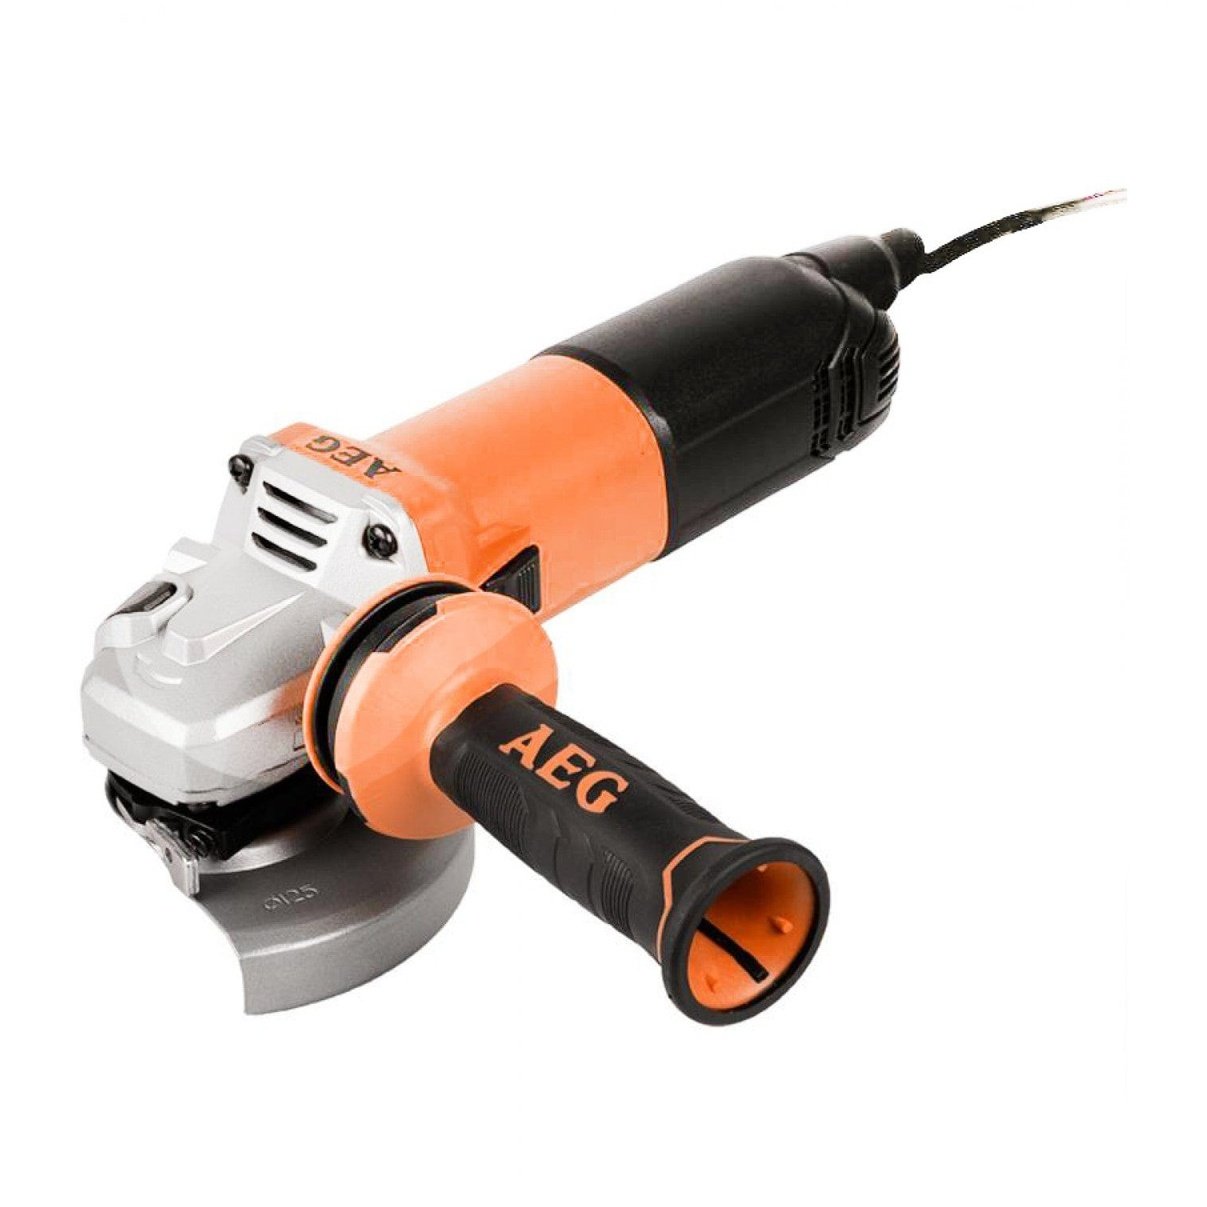 AEG 4.5"/115mm Angle Grinder 1200W - WS12-115 | Supply Master | Accra, Ghana Grinder Buy Tools hardware Building materials